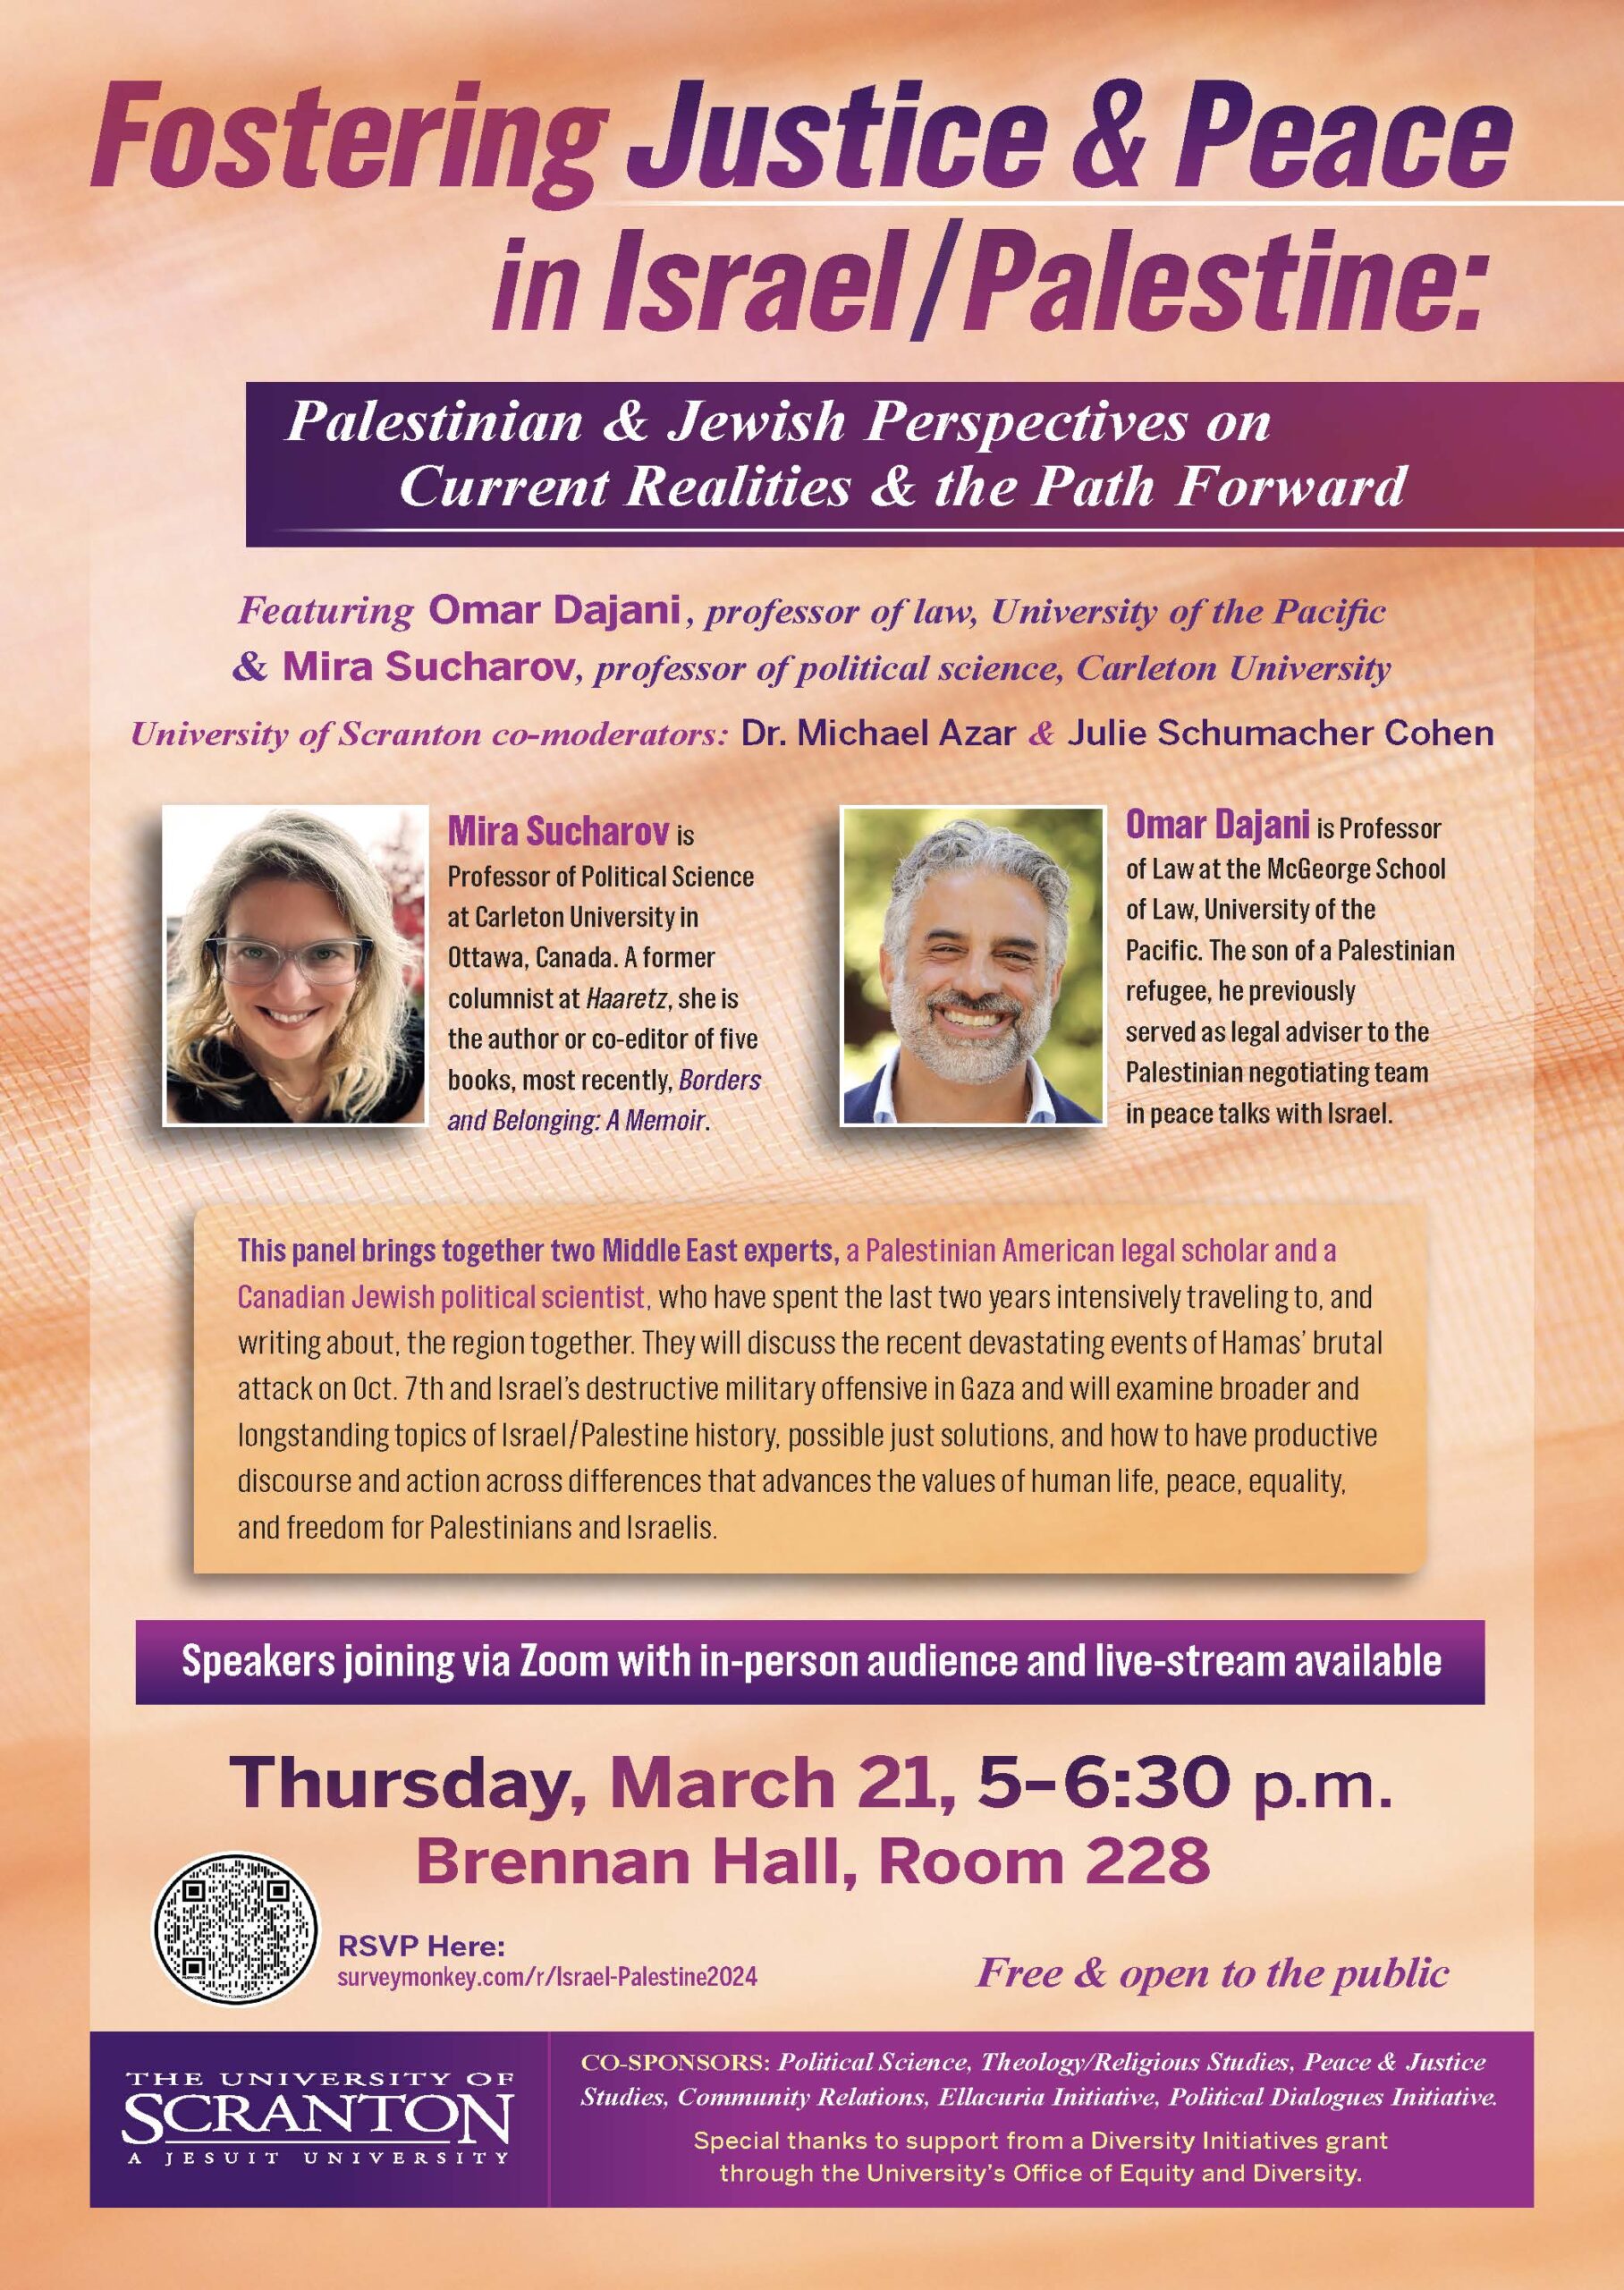 Flyer for Israel/Palestine Foster Peace Panel at University of Scranton on March 21 5pm